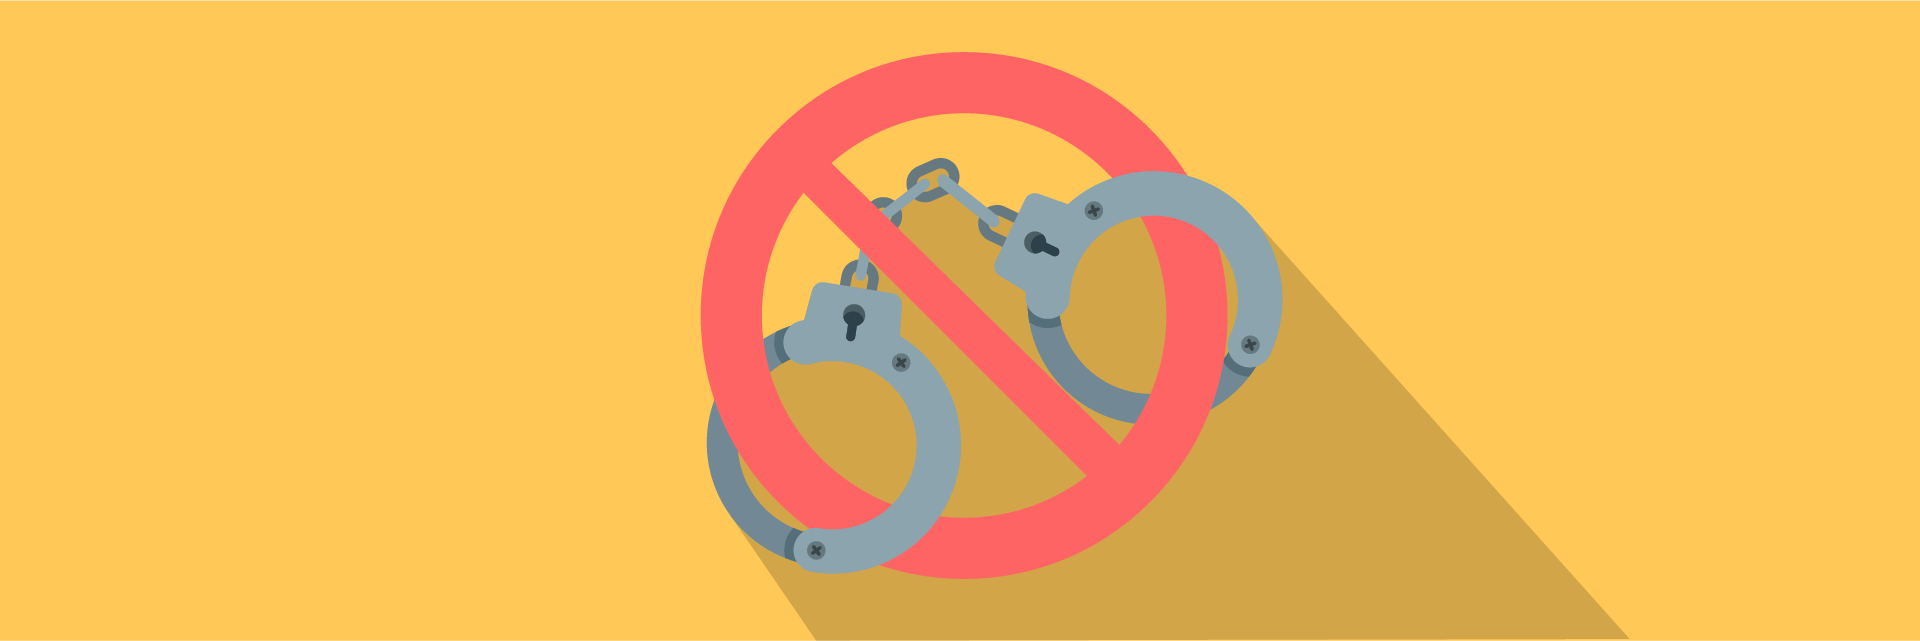 icon of handcuffs in a circle with line through it